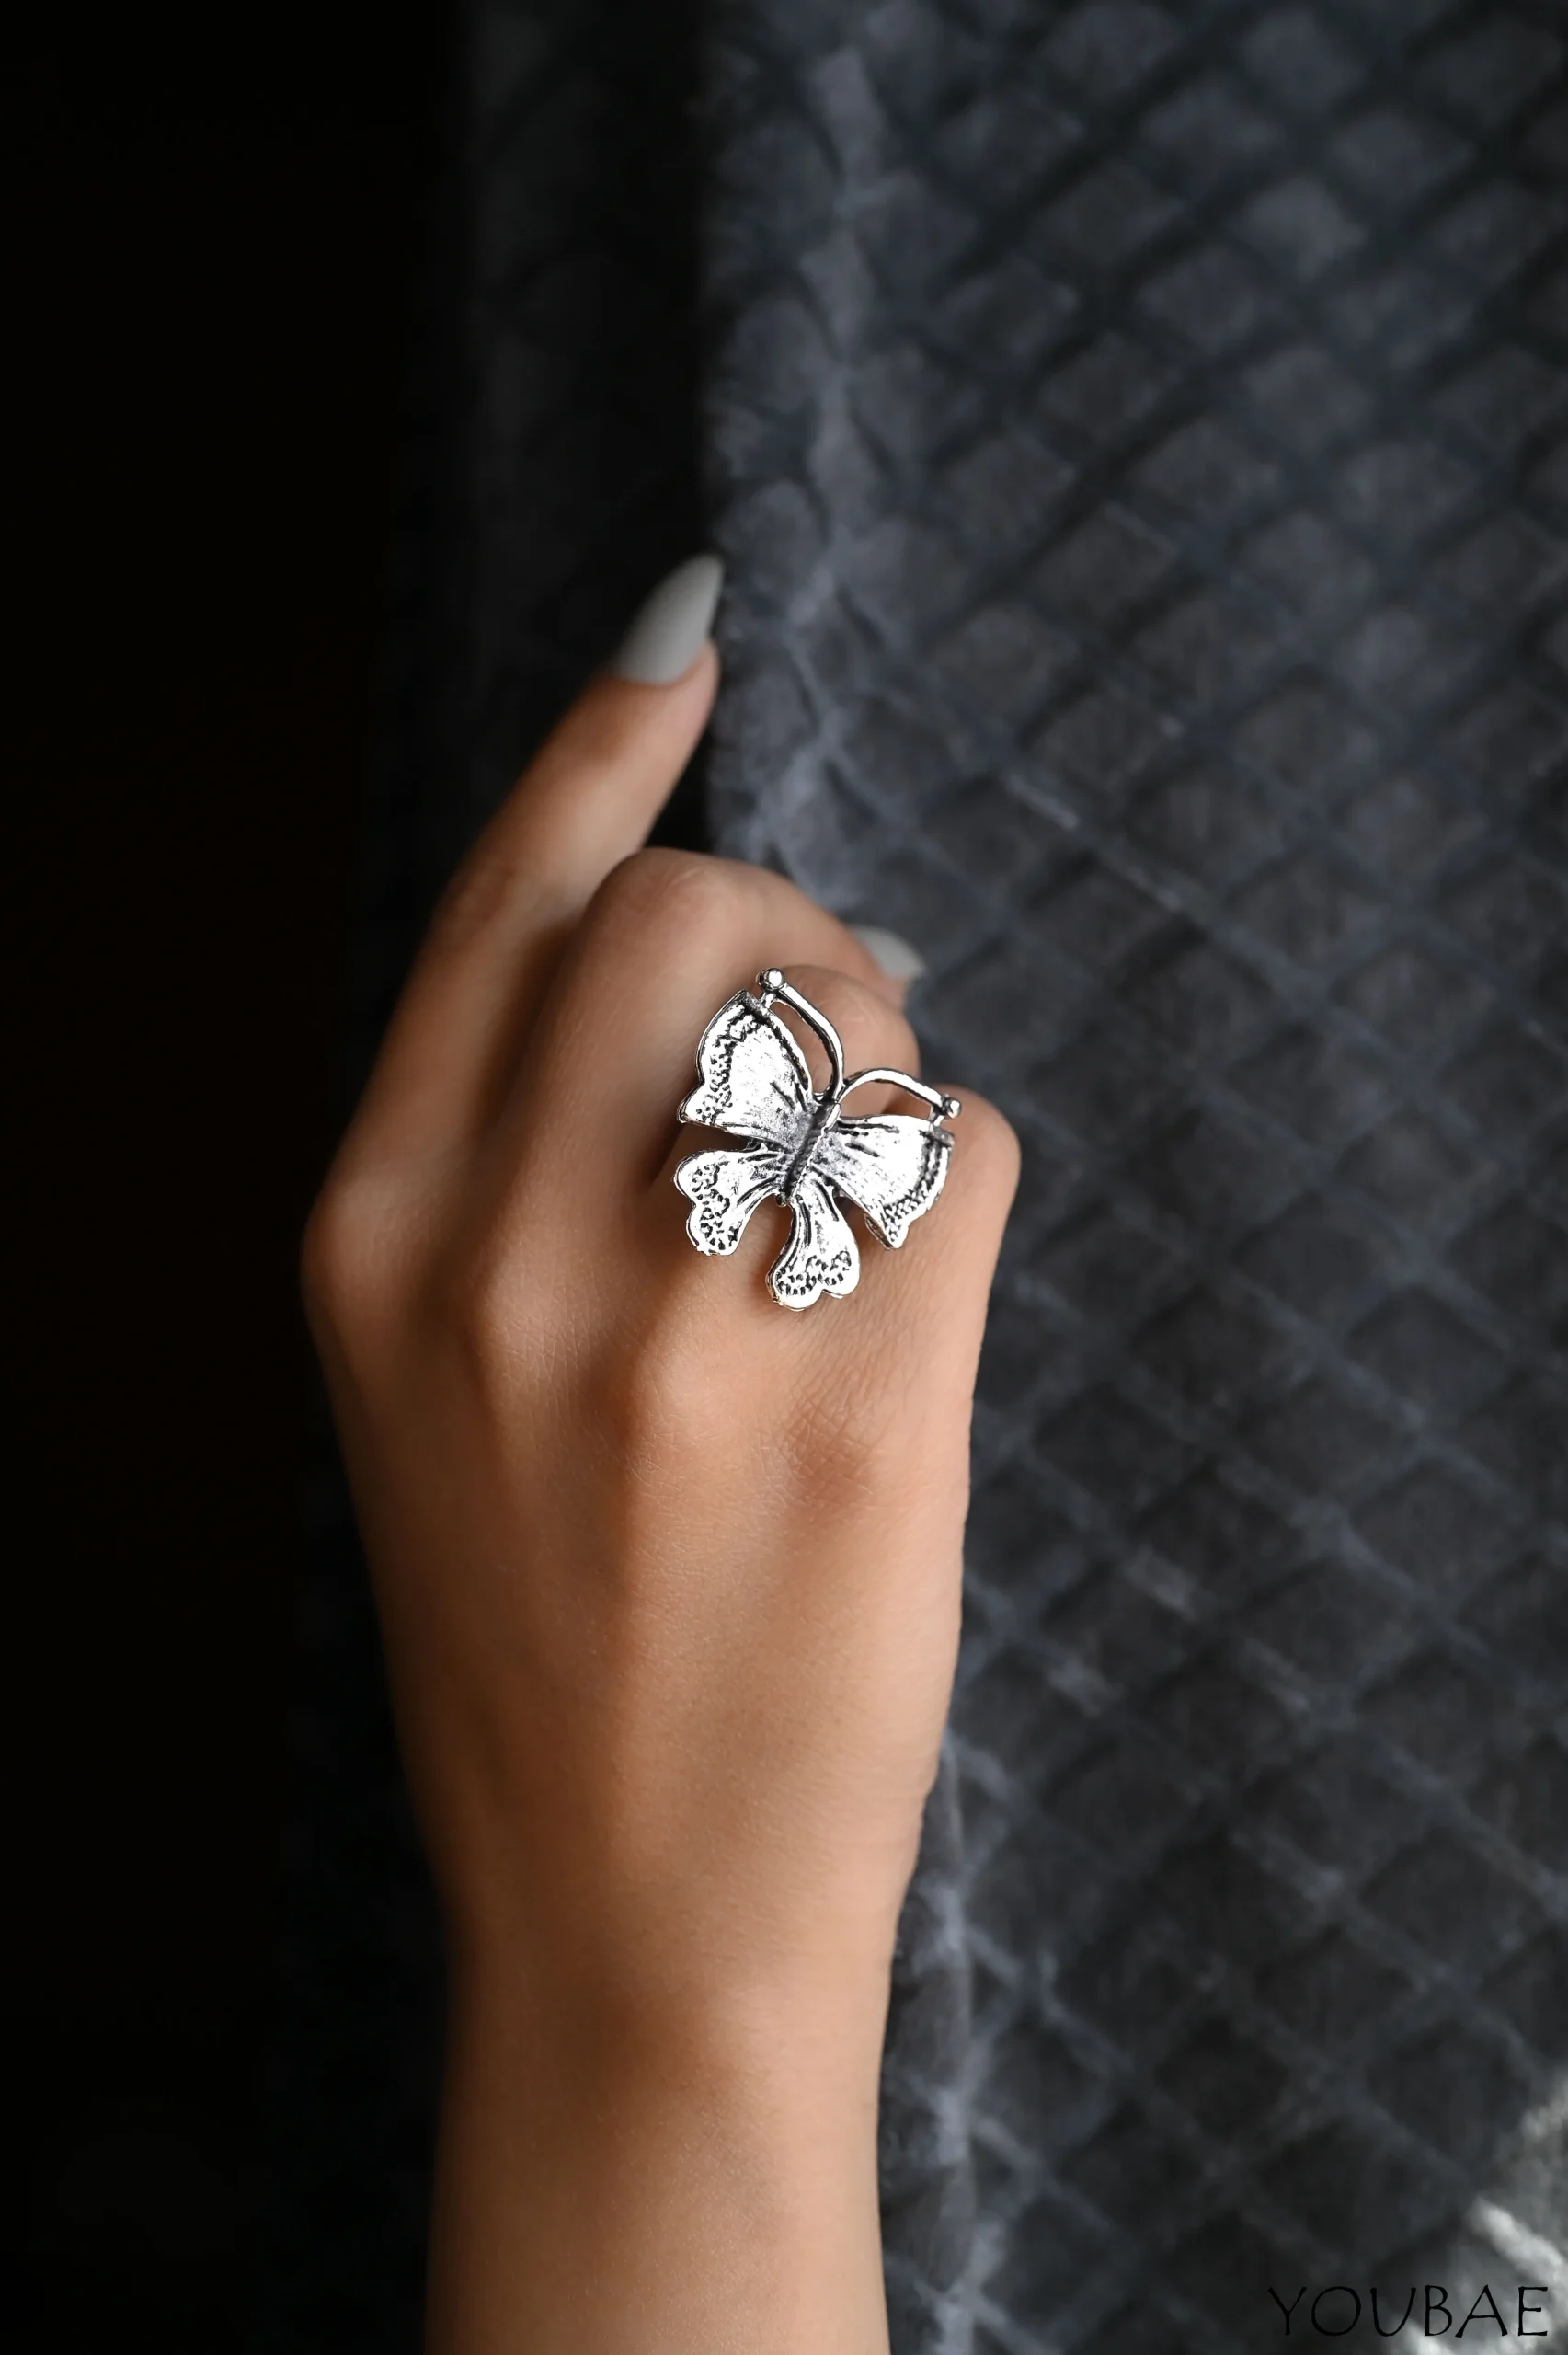 Statement Butterfly Ring - Shop for Korean Skincare, Cosmetics, Beauty ...